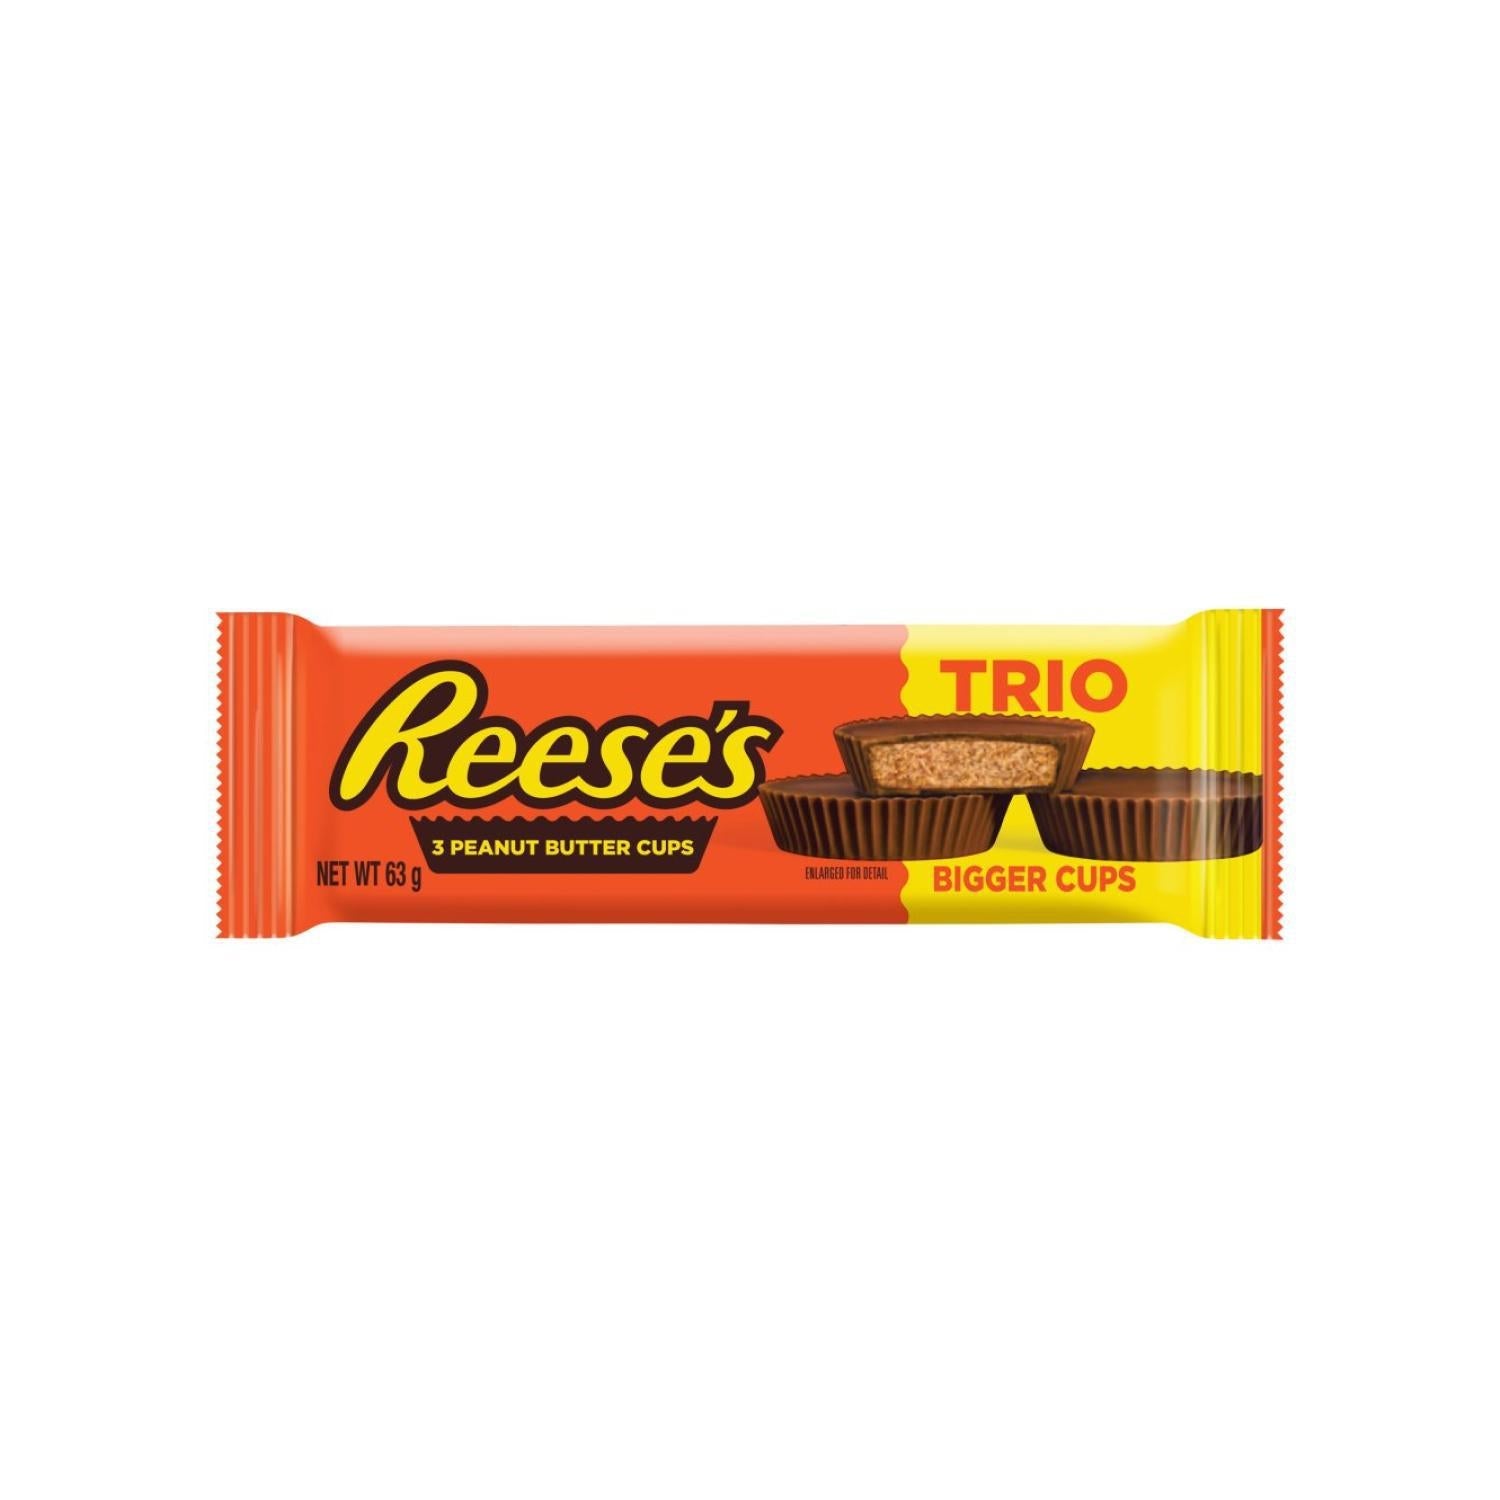 Reese's - Trio Peanut Butter Cups